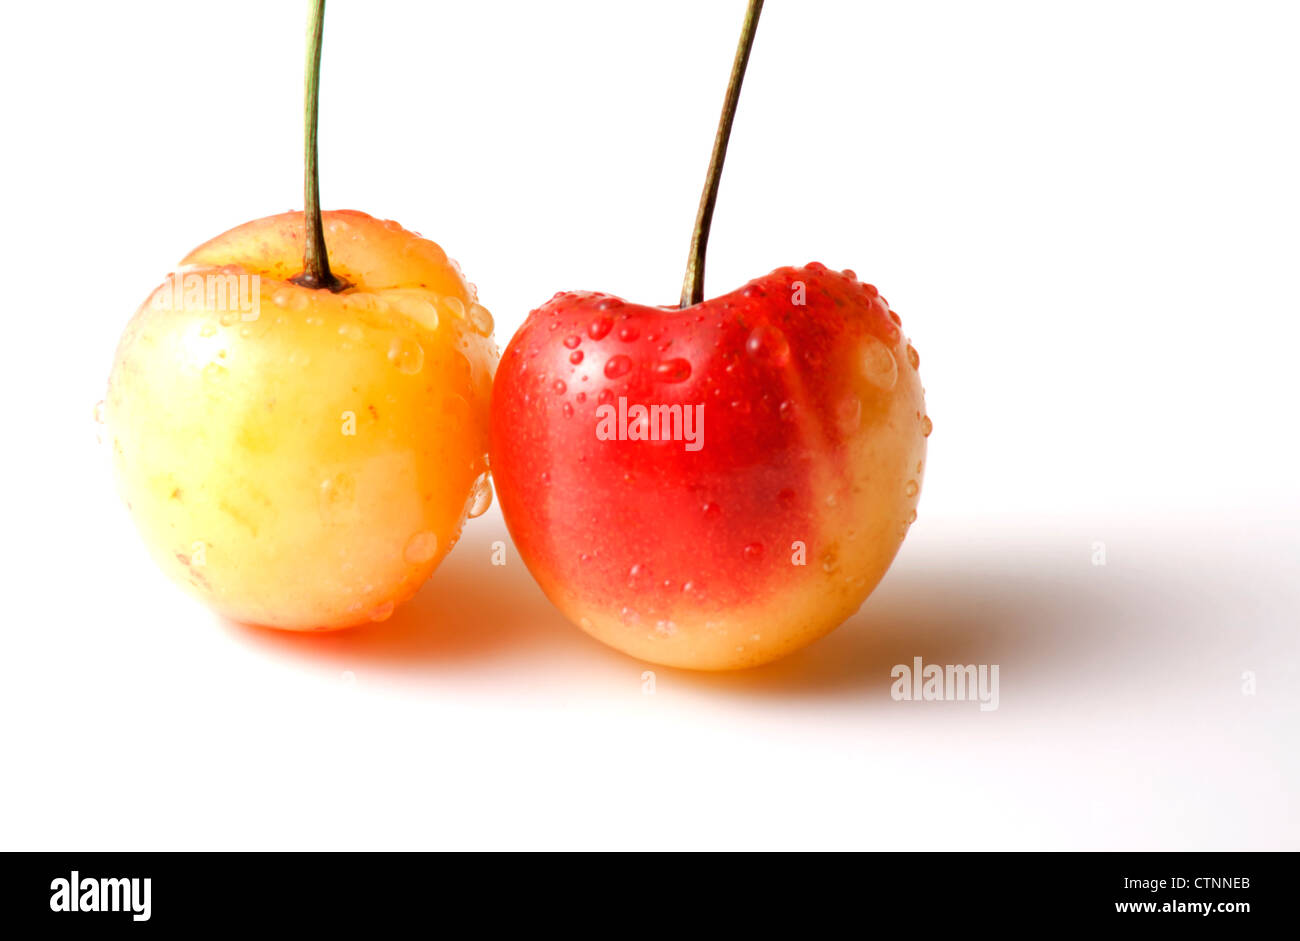 Two yellow and red Rainier cherries isolated on white background with copy space. Stock Photo